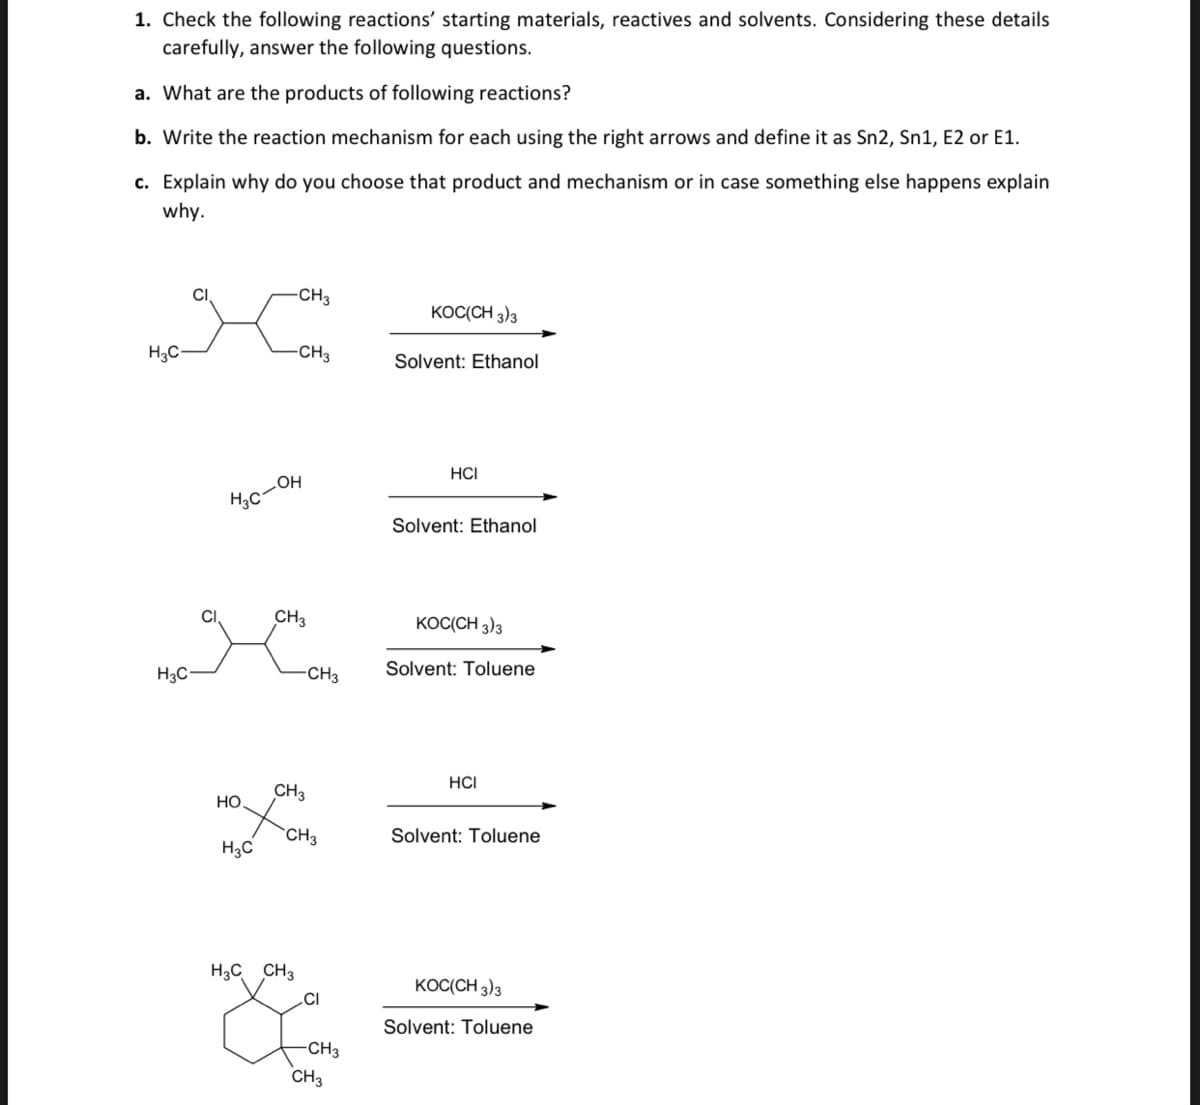 1. Check the following reactions' starting materials, reactives and solvents. Considering these details
carefully, answer the following questions.
a. What are the products of following reactions?
b. Write the reaction mechanism for each using the right arrows and define it as Sn2, Sn1, E2 or E1.
c. Explain why do you choose that product and mechanism or in case something else happens explain
why.
CI
CH3
KOC(CH 3)3
H3C-
-CH3
Solvent: Ethanol
HCI
Solvent: Ethanol
CH3
KOC(CH 3)3
H3C
-CH3
Solvent: Toluene
HCI
CH3
Но
CH3
Solvent: Toluene
H3C
H3C CH3
KOC(CH 3)3
.CI
Solvent: Toluene
CH3
CH3
